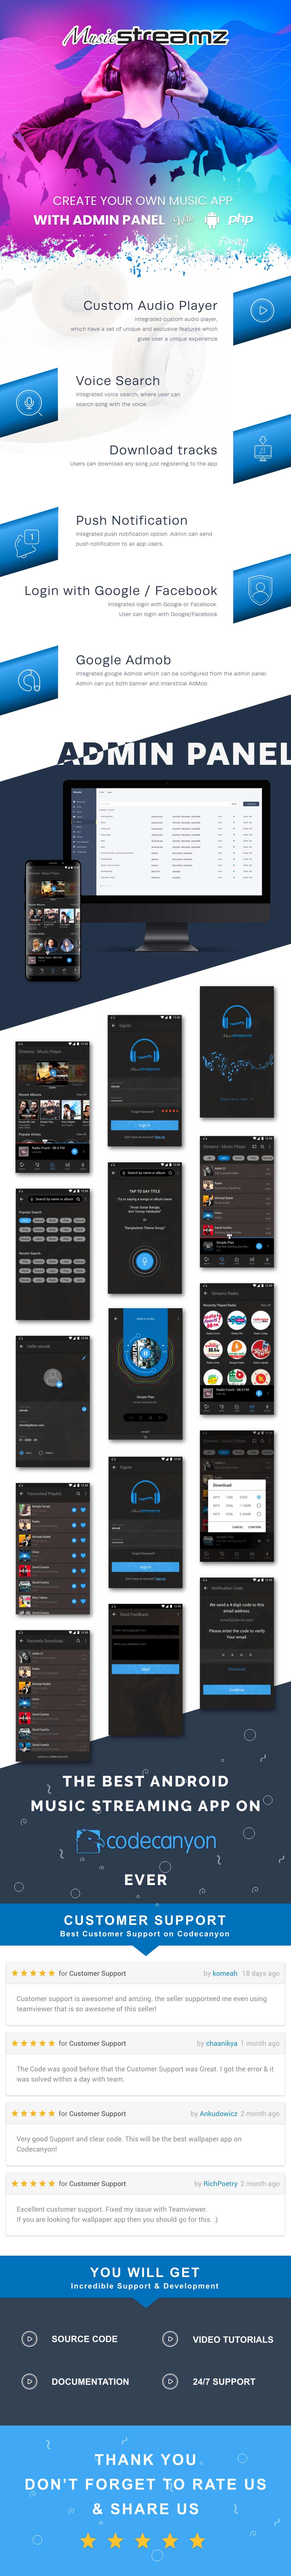 Streamz - A music streaming android app with admin panel - 7